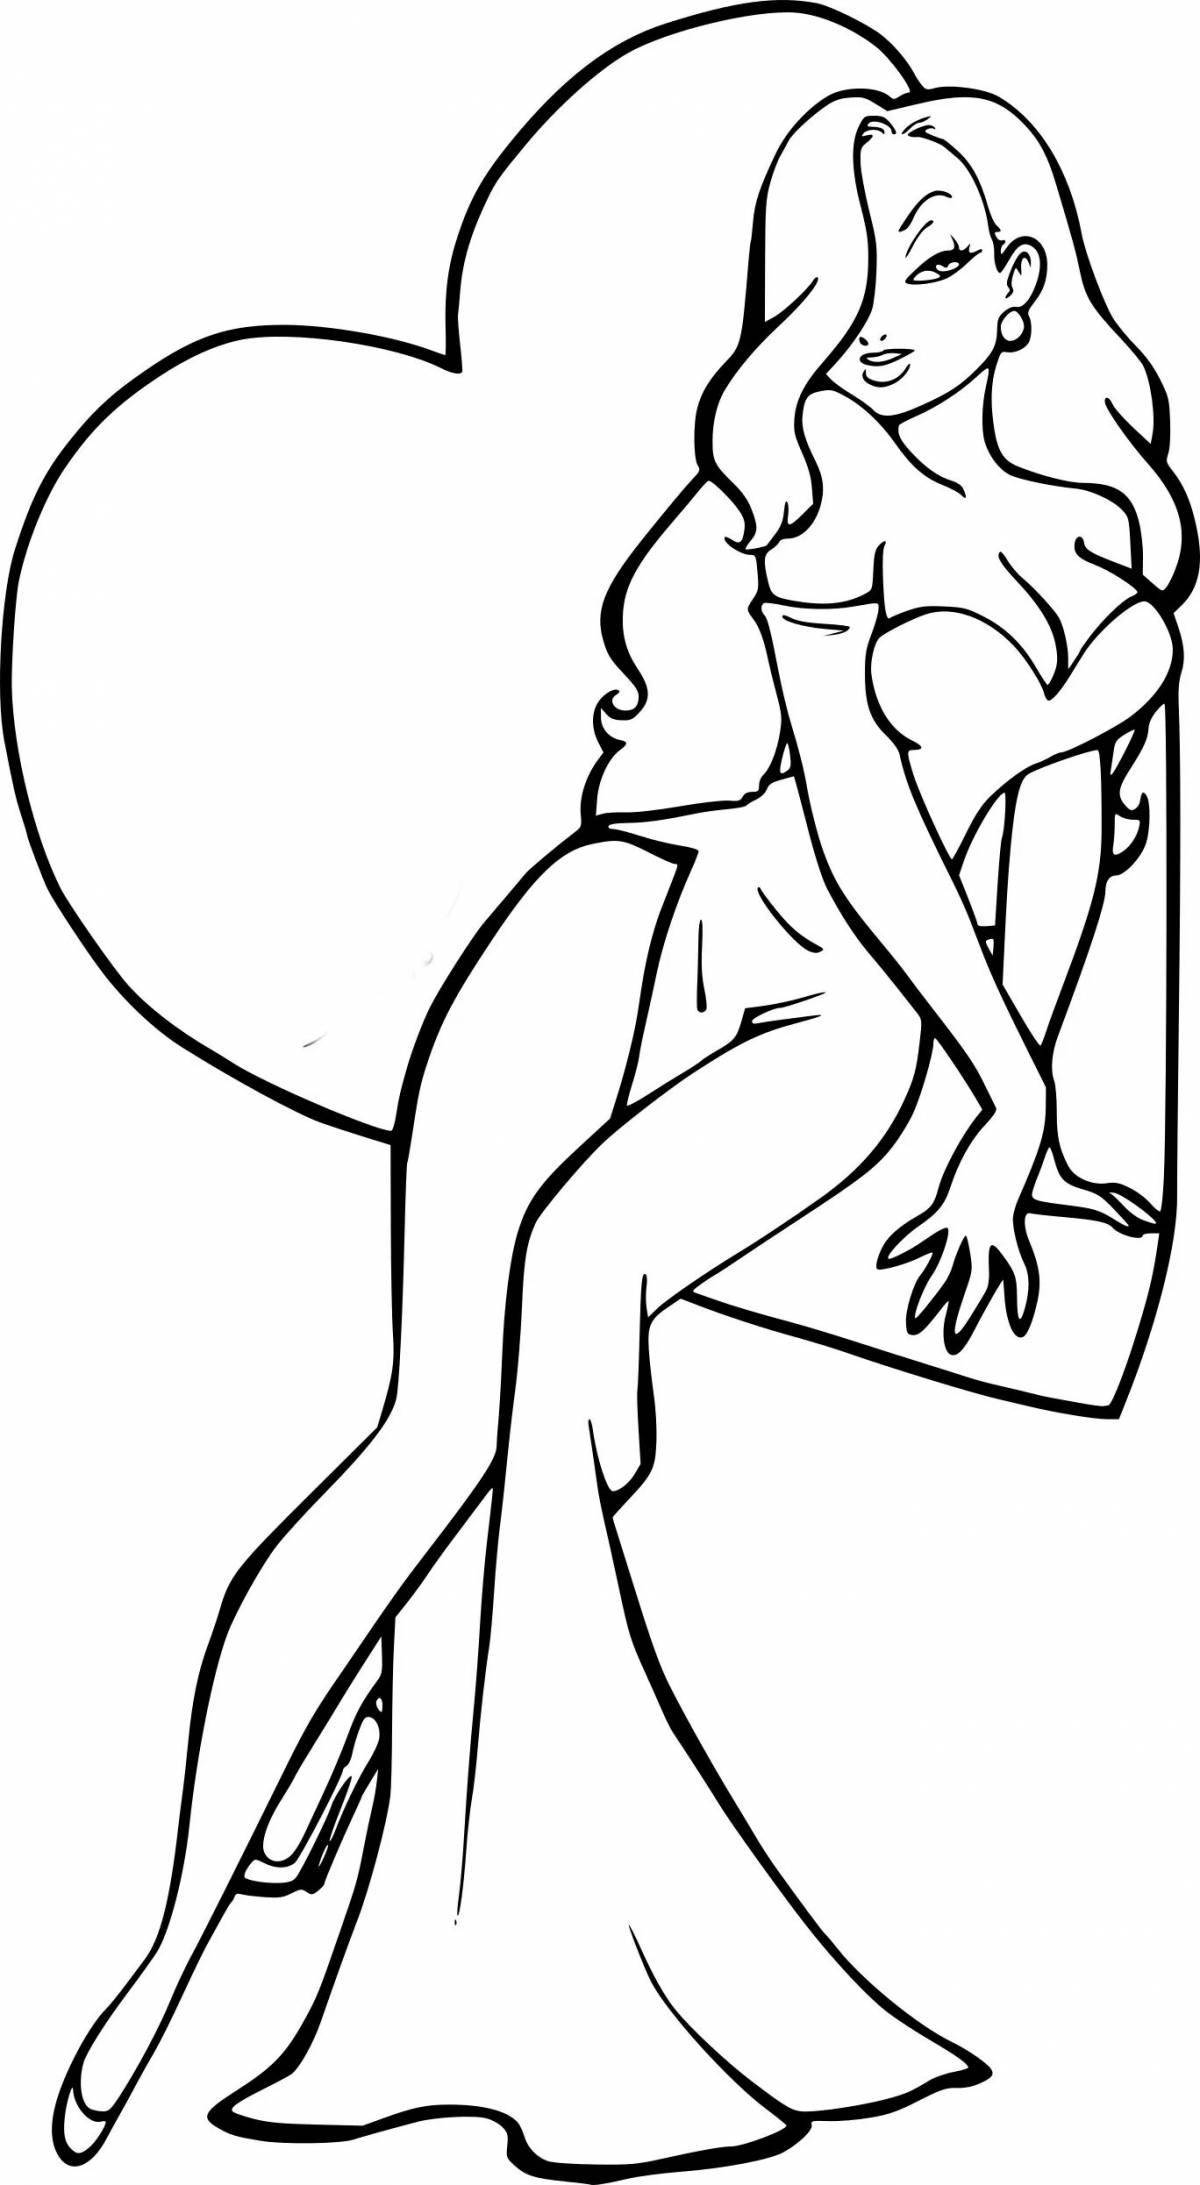 Fancy coloring page 18 years of vulgarity